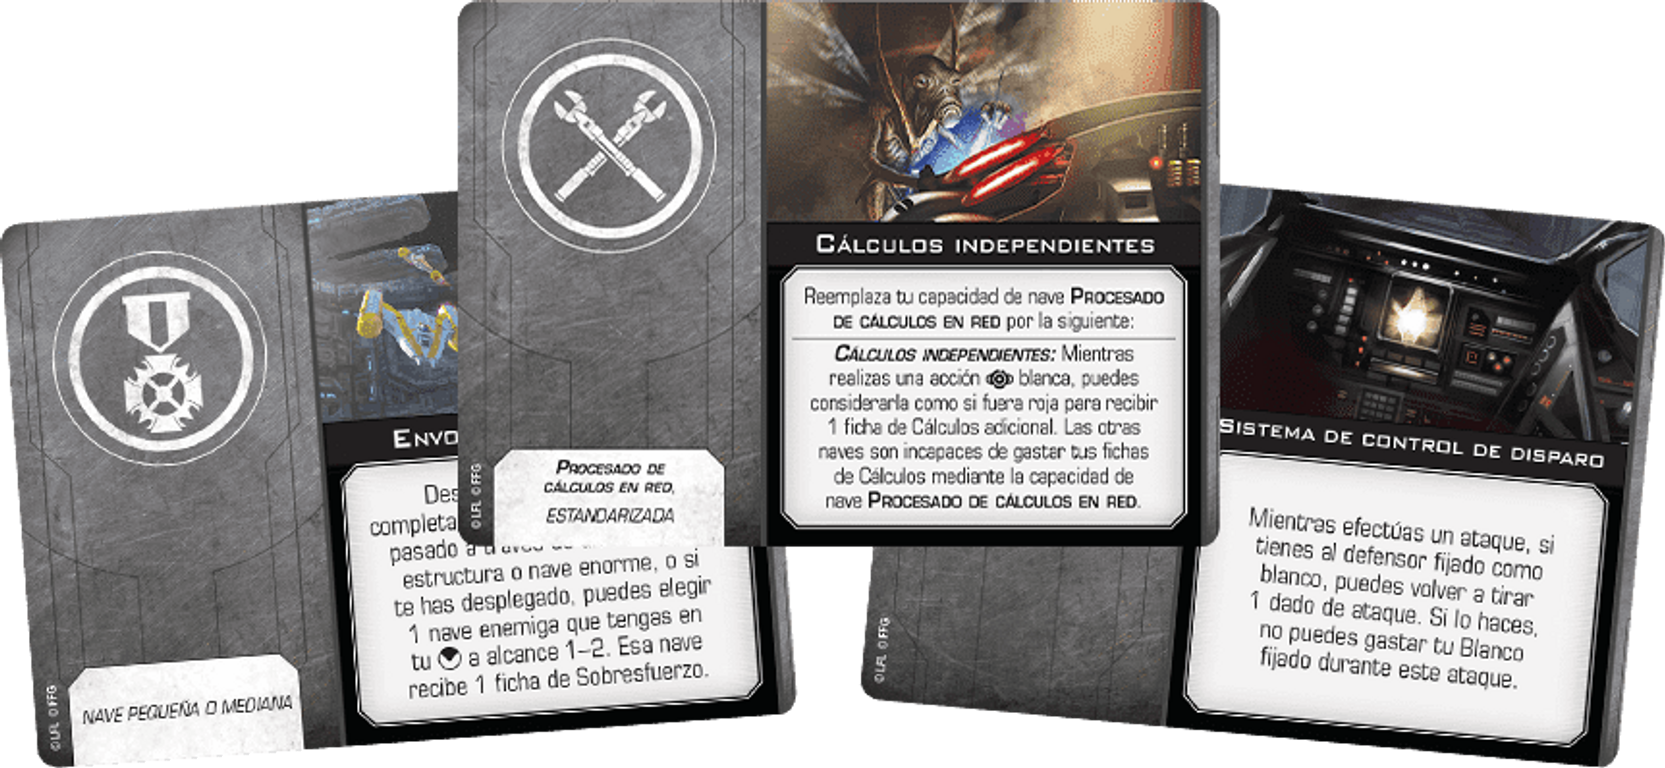 Star Wars: X-Wing (Second Edition) – Droid Tri-Fighter Expansion Pack cartas